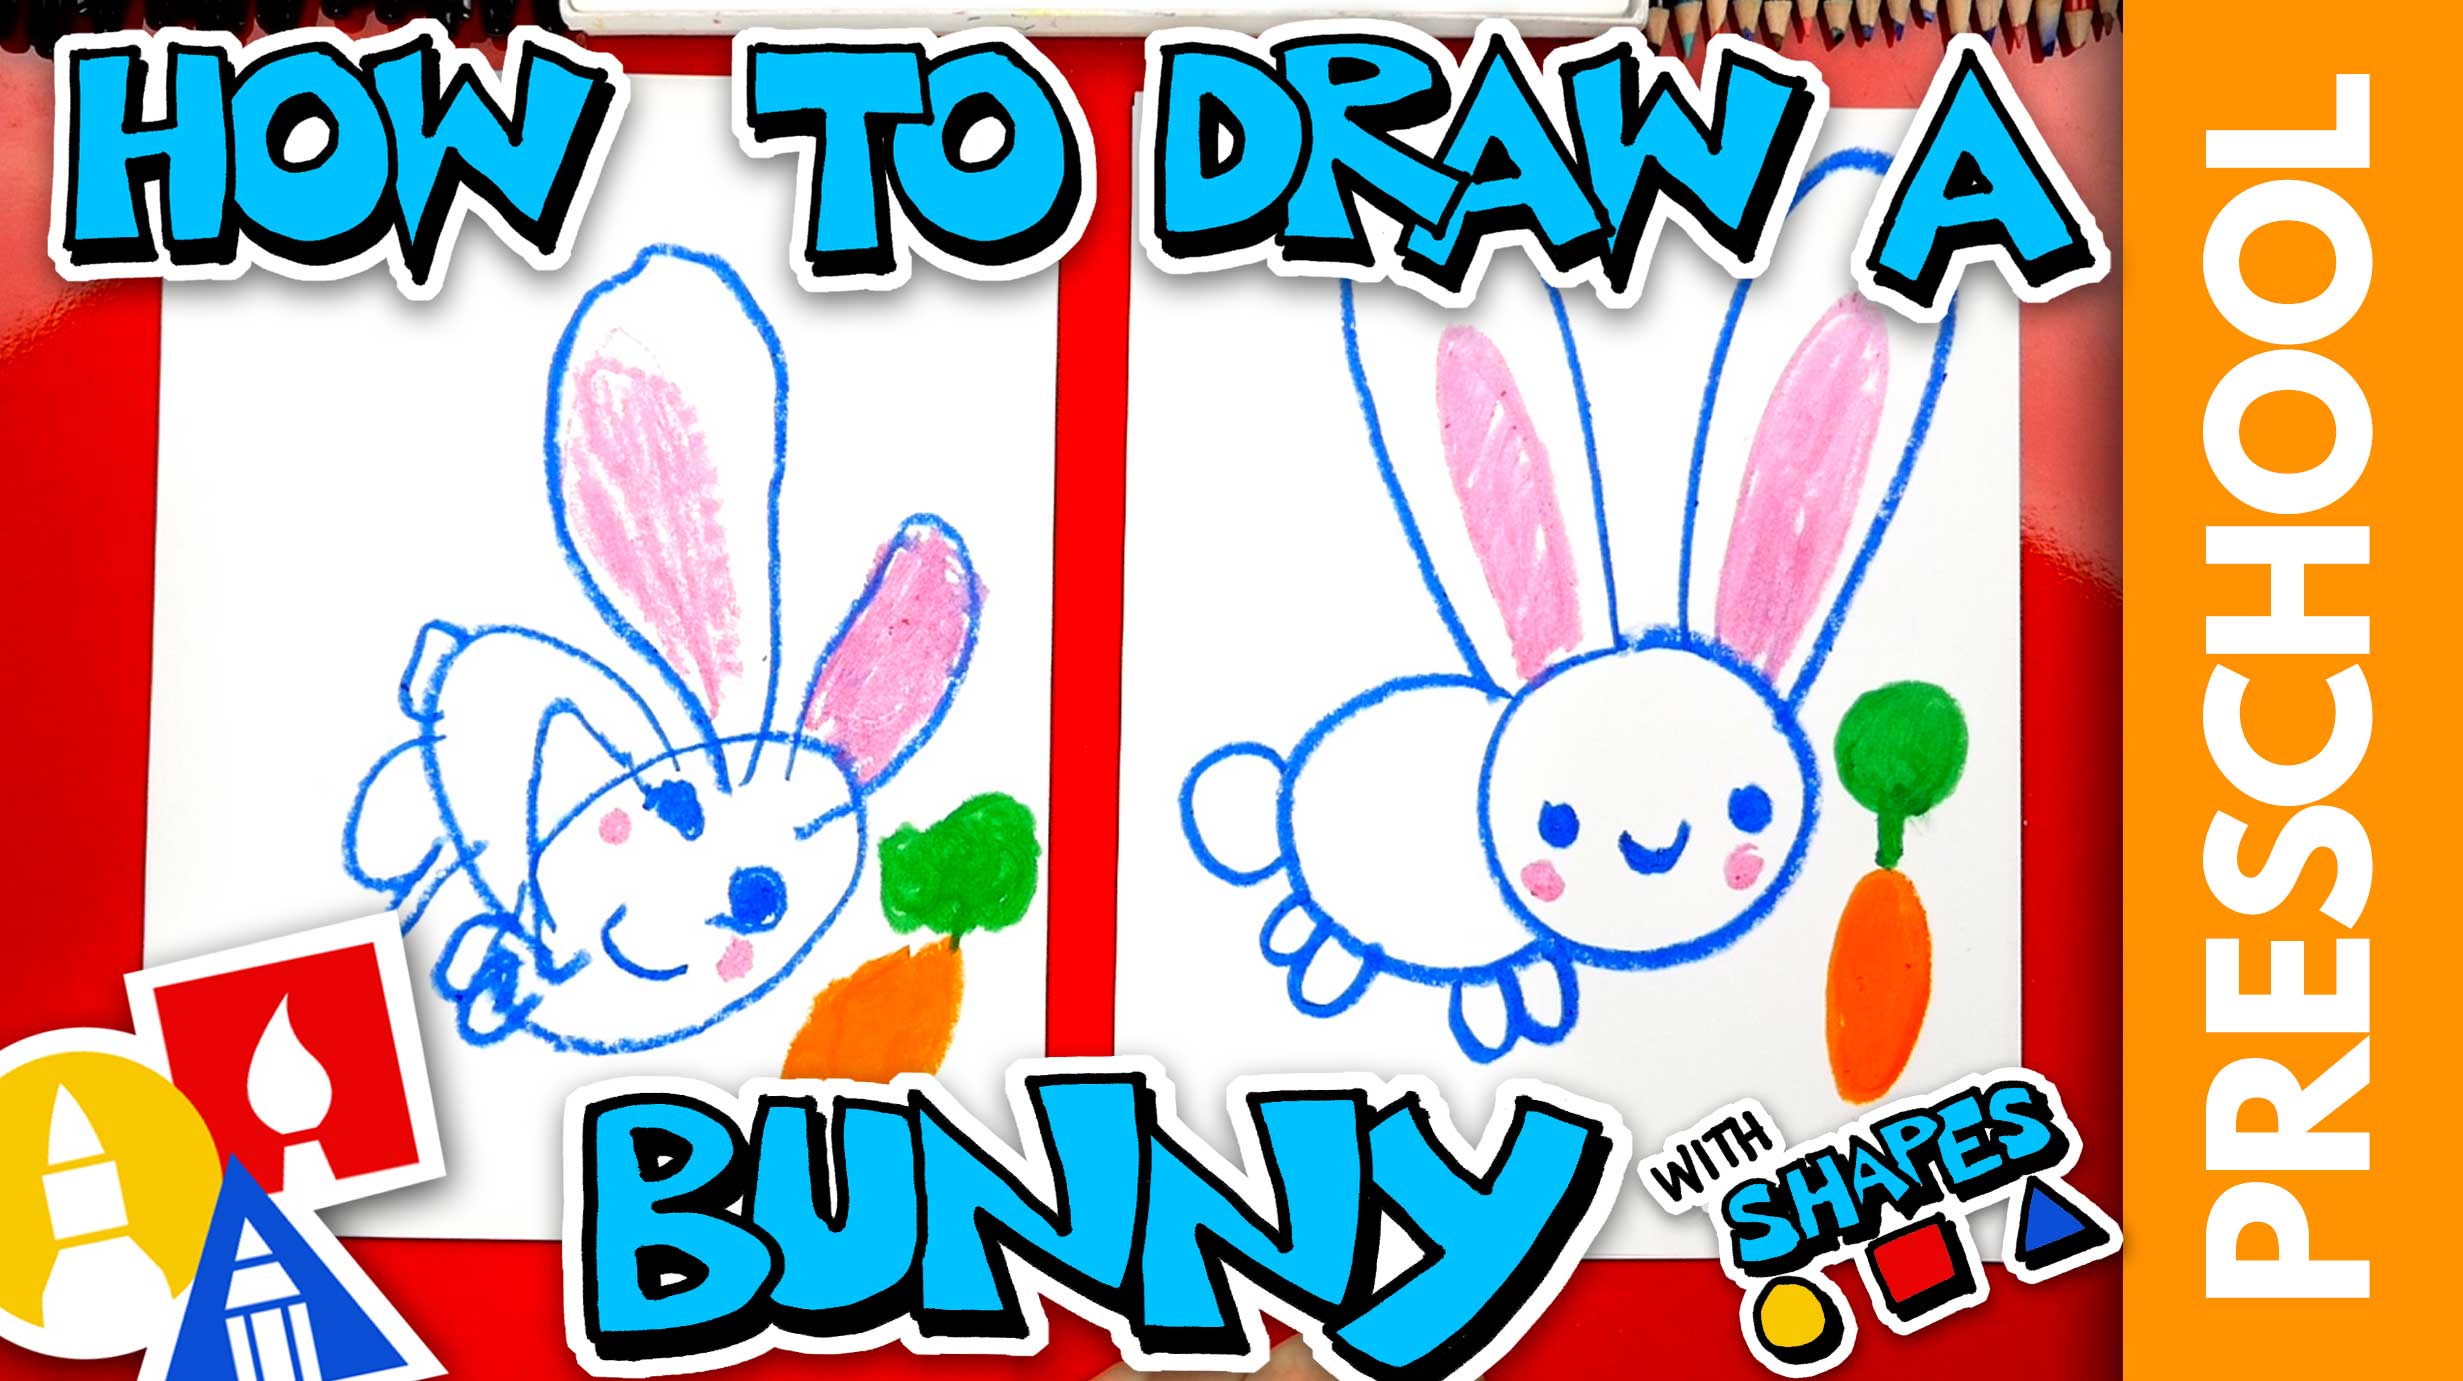 Drawing A Bunny With Shapes - Preschool - Art For Kids Hub